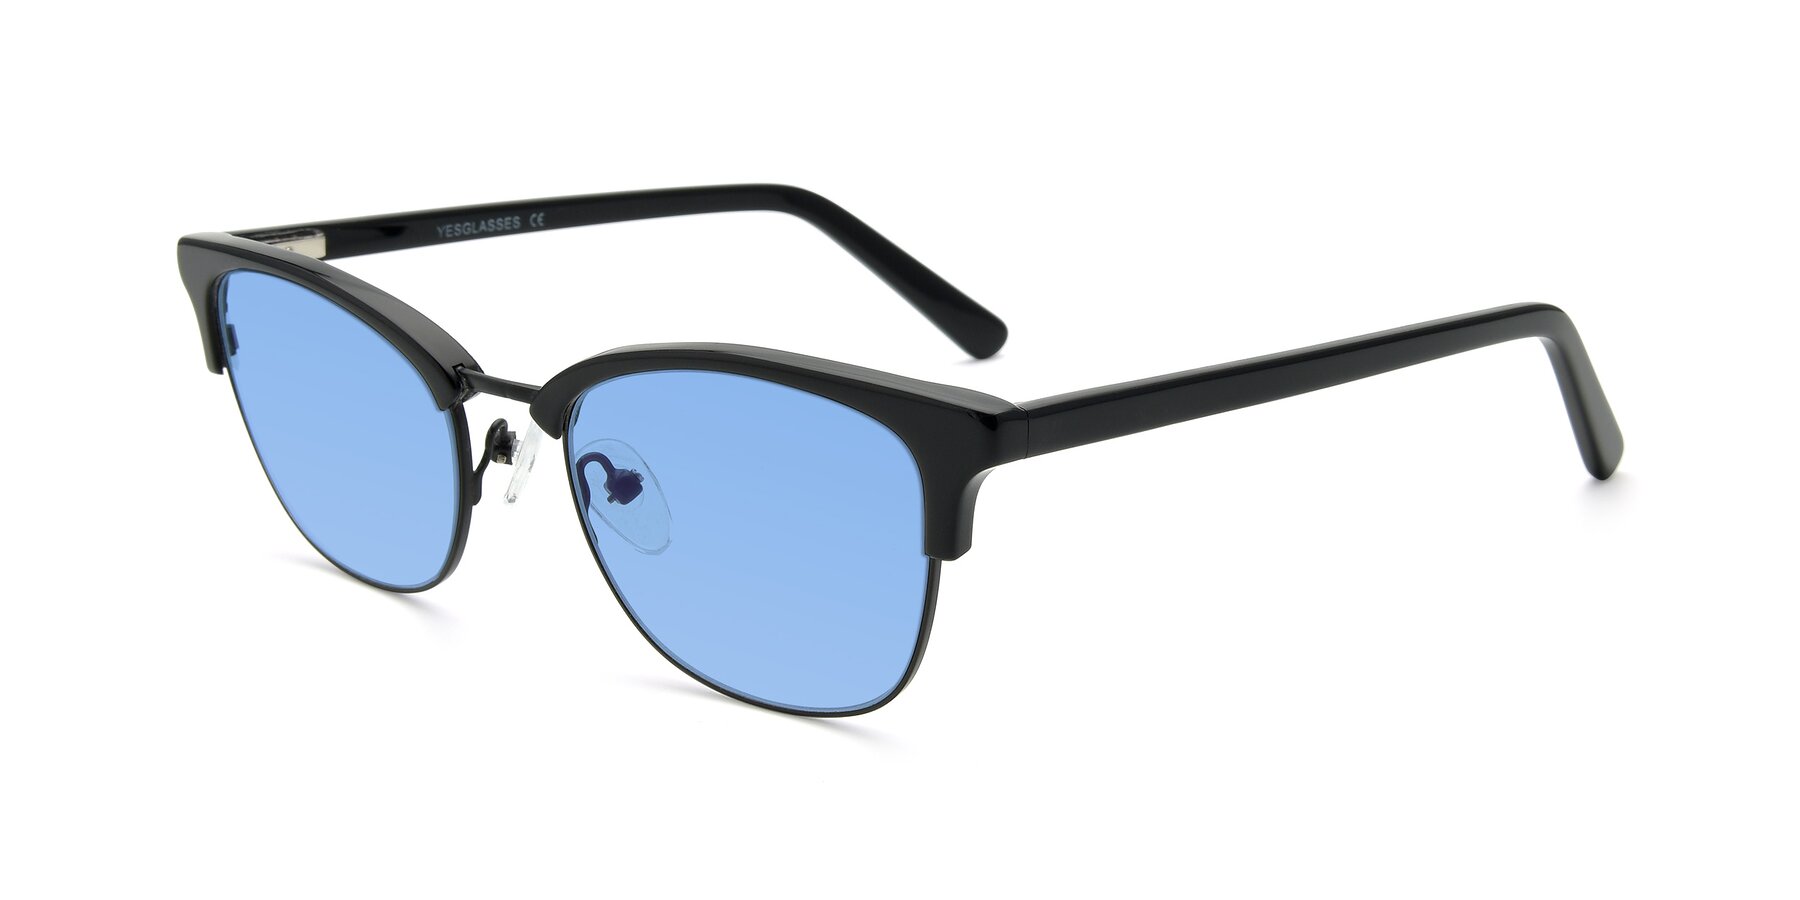 Angle of 17463 in Black with Medium Blue Tinted Lenses